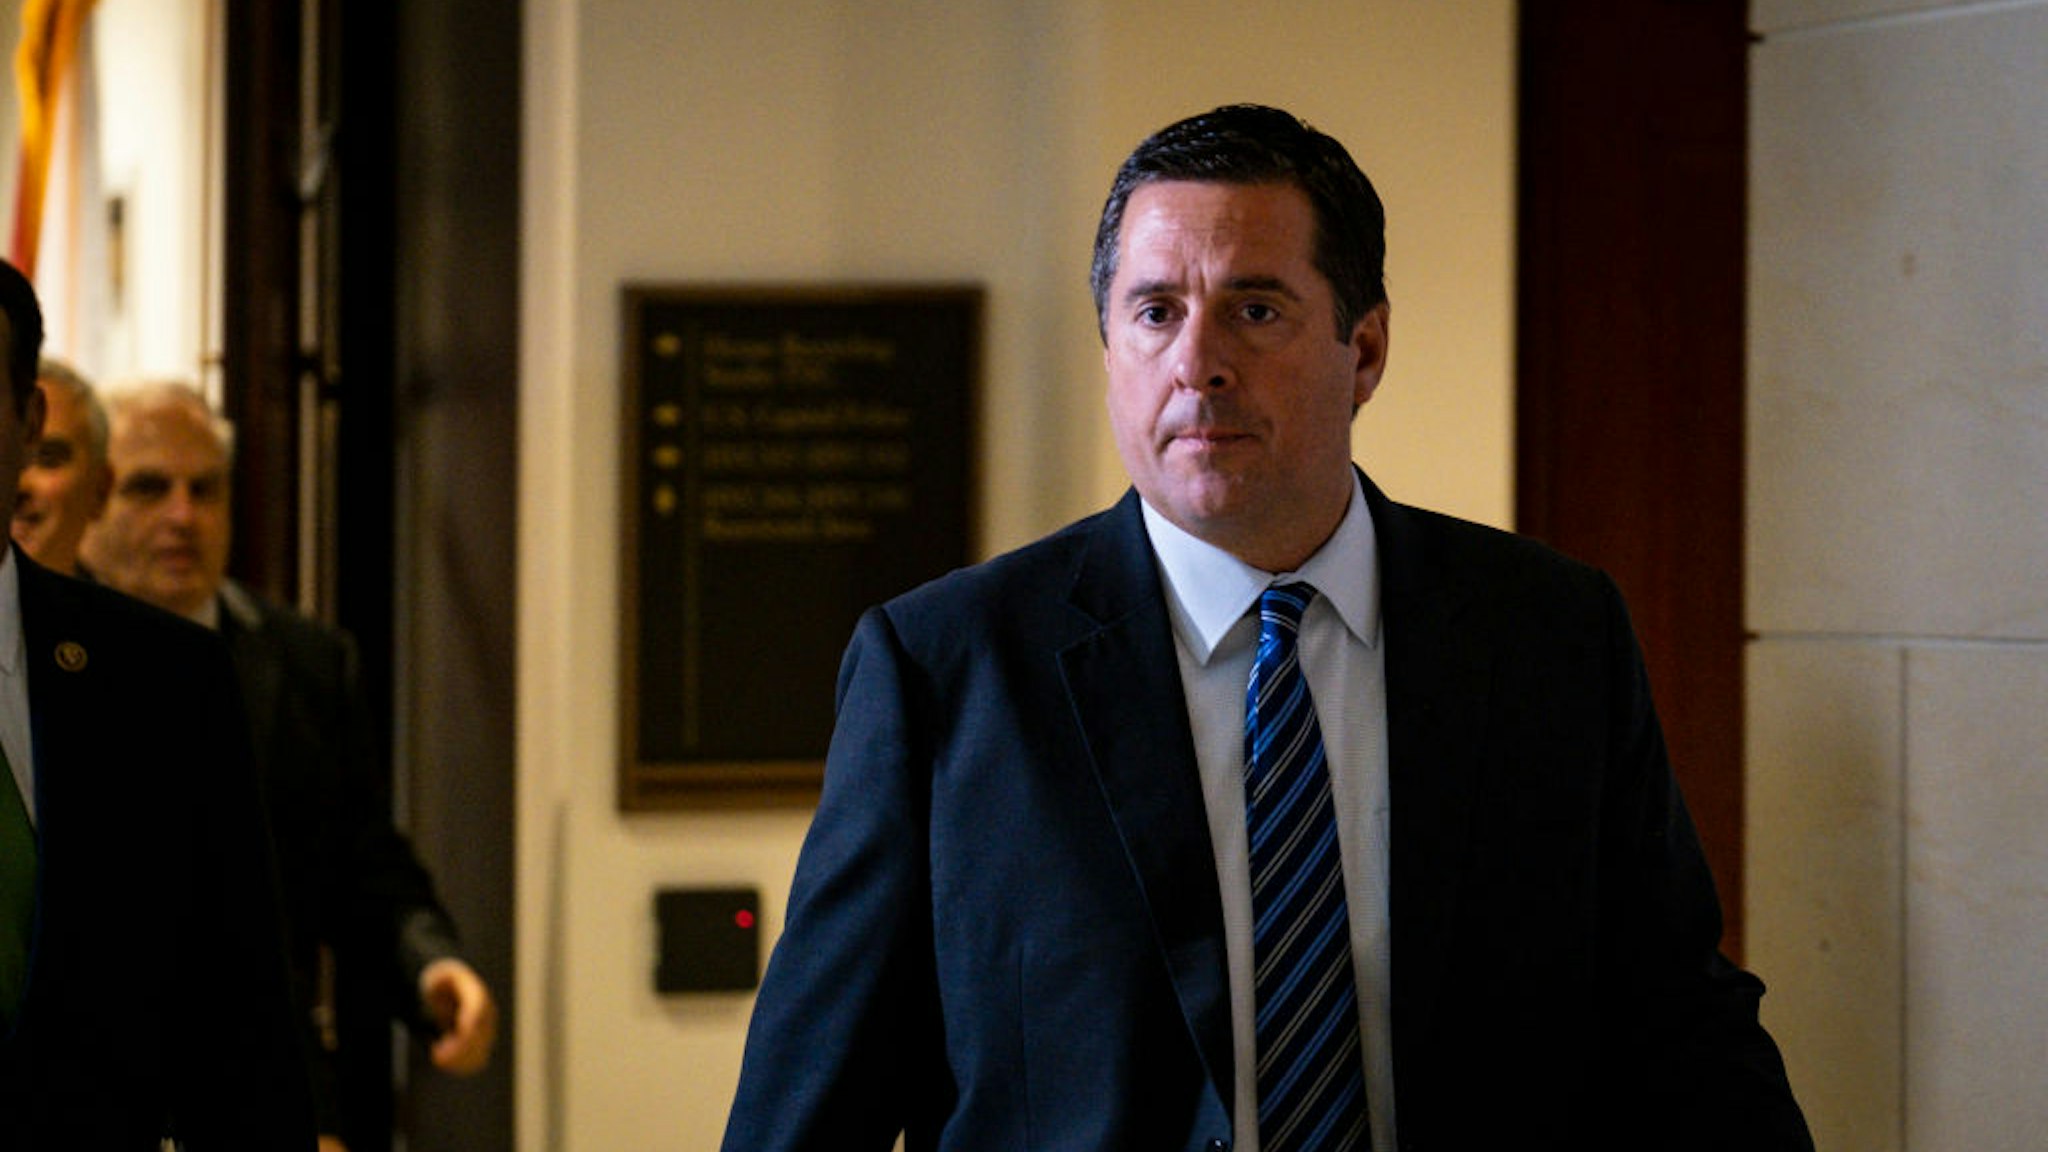 Rep. Devin Nunes (R-CA) walks past the media without comment after leaving a closed door briefing with Intelligence Community Inspector General Michael Atkinson before the House Intelligence Committee on October 4, 2019 in Washington, DC.